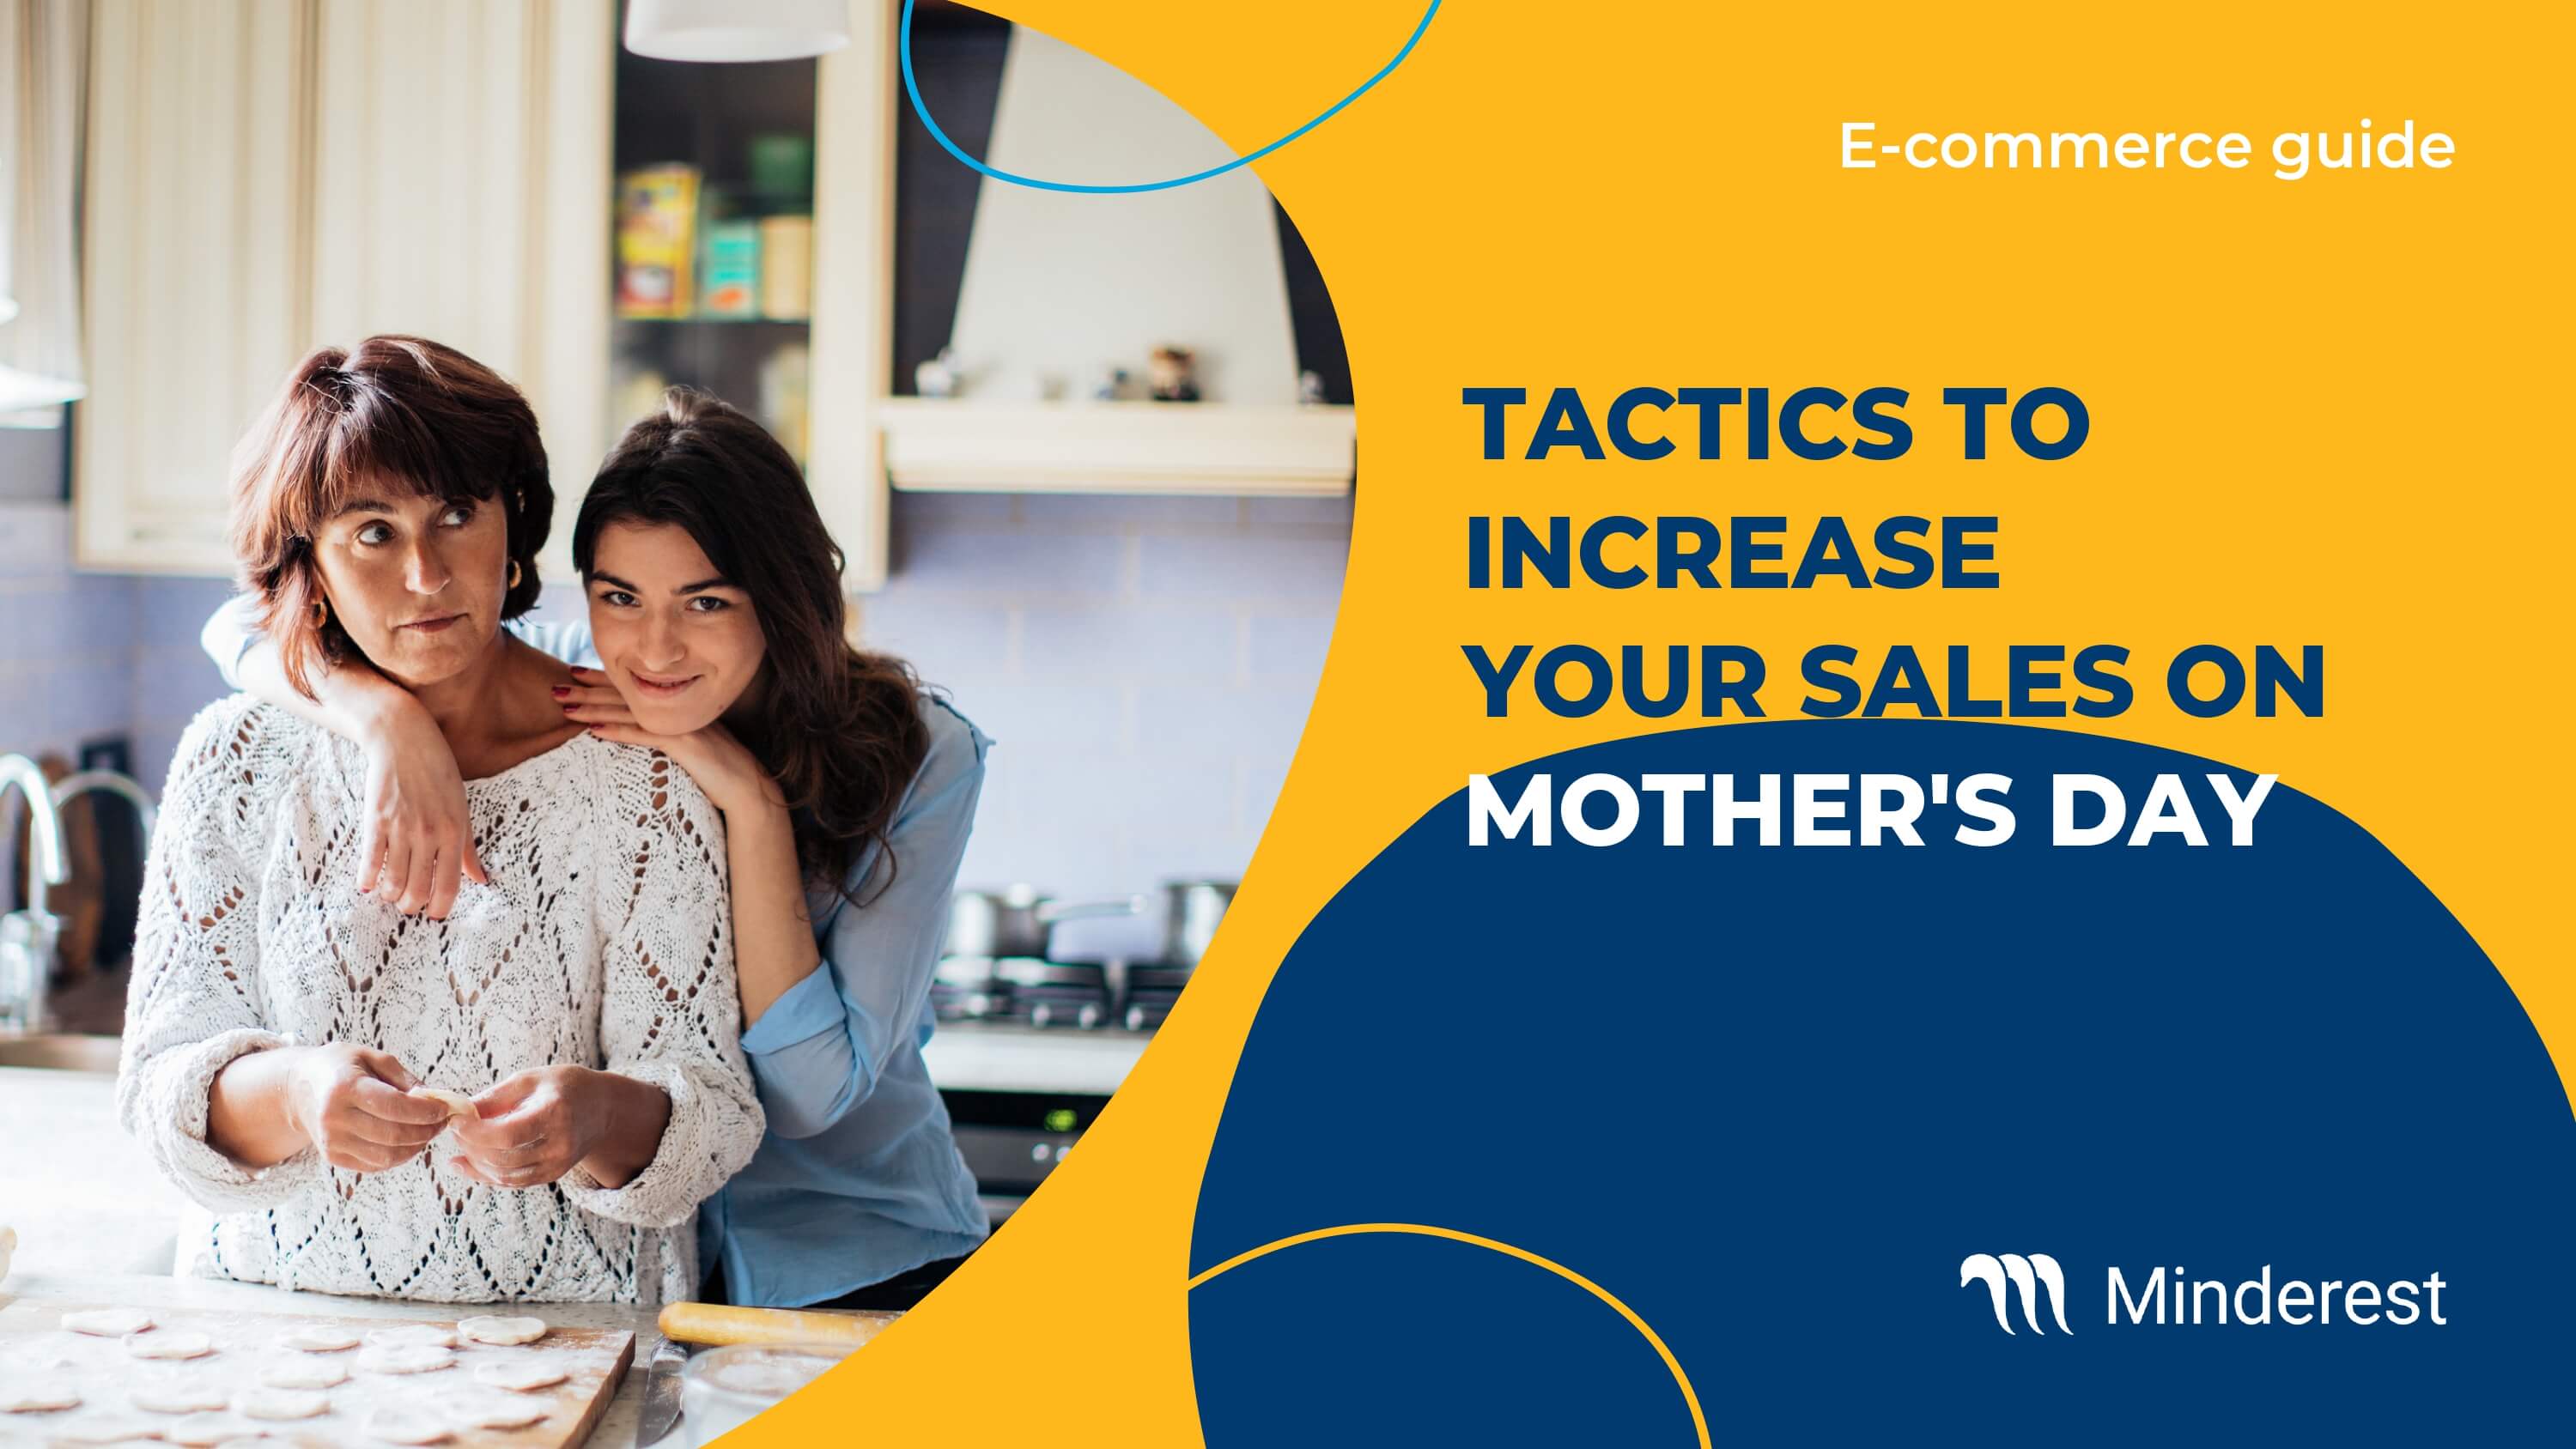 eCommerce guide mothers day